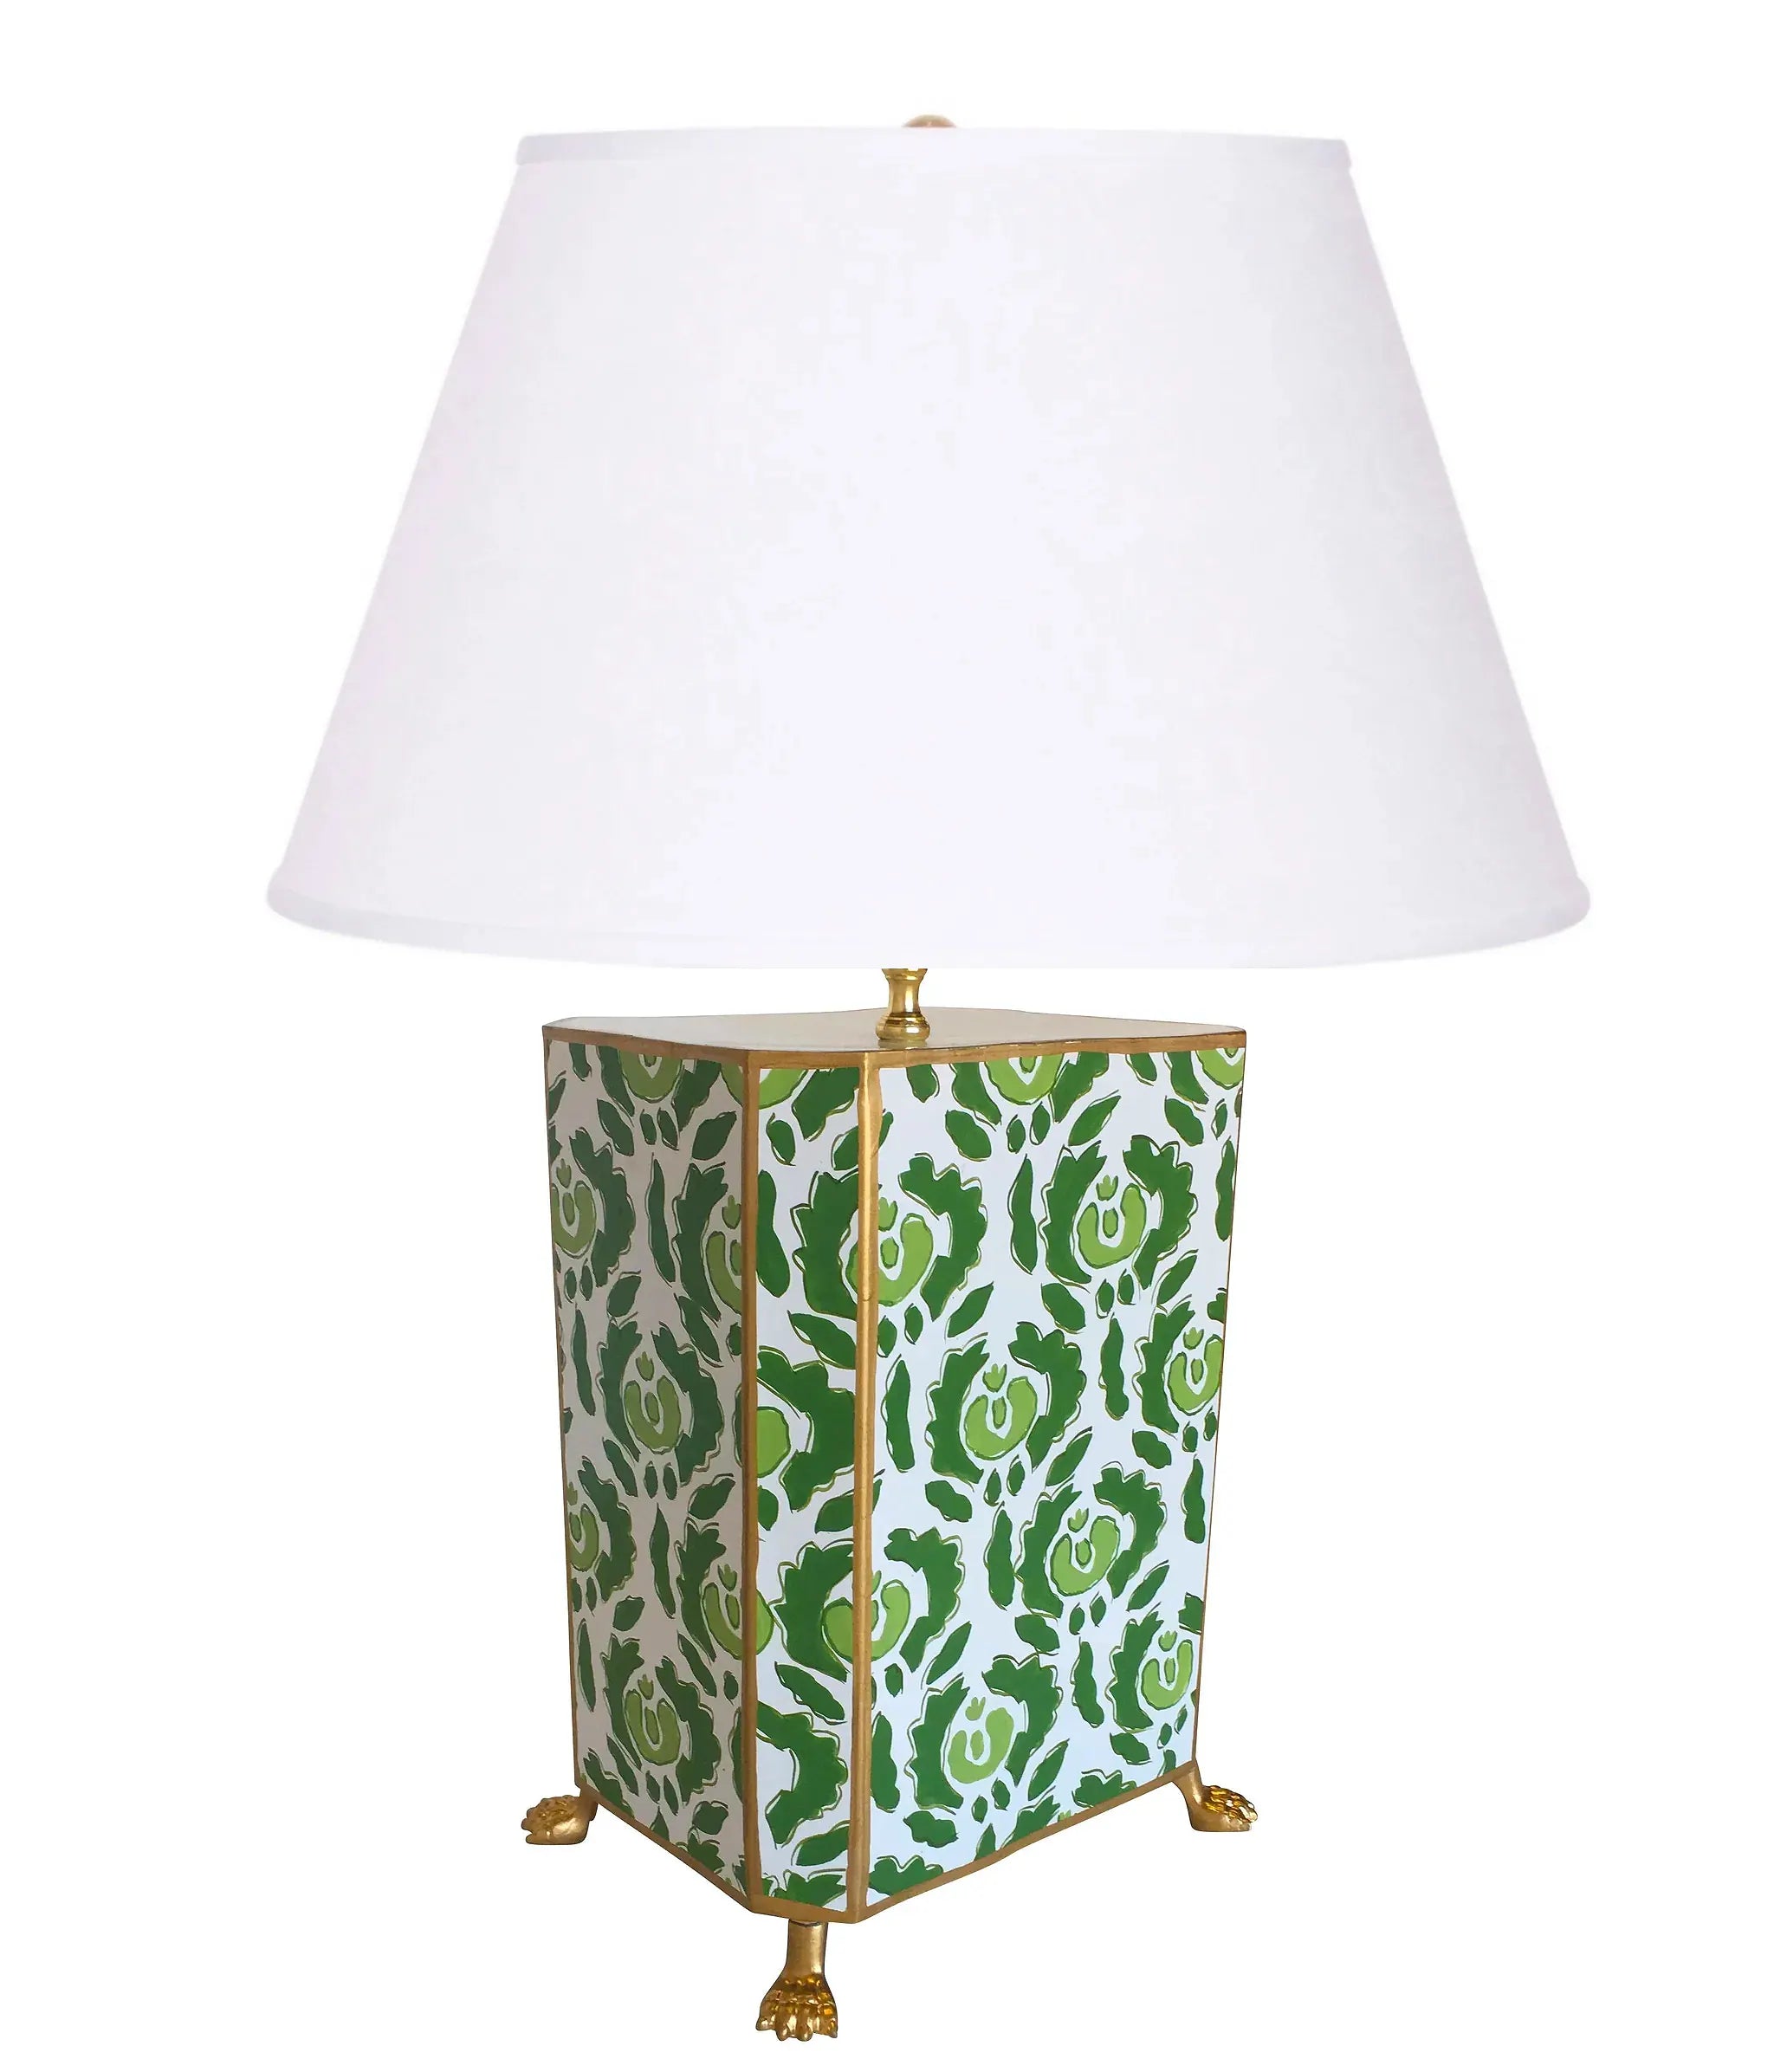 Beaufont in Green Lamp, Large